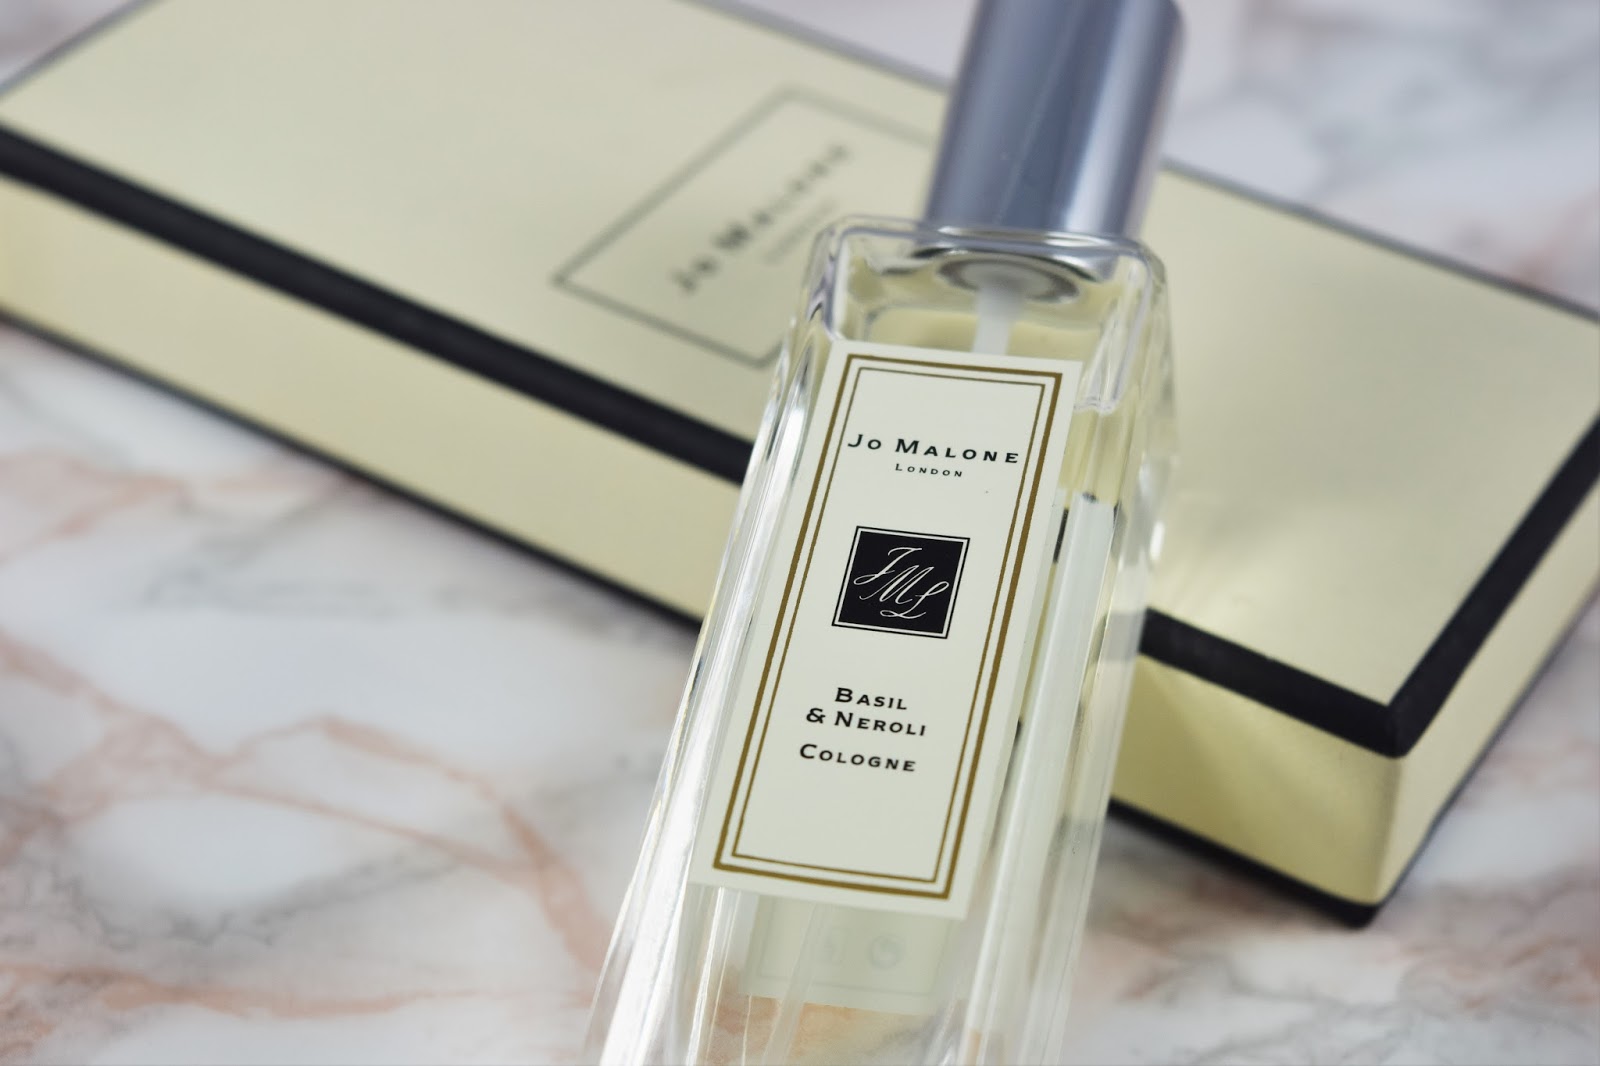 Another product that I’ve been loving for its scent is Jo Malone’s new Basi...